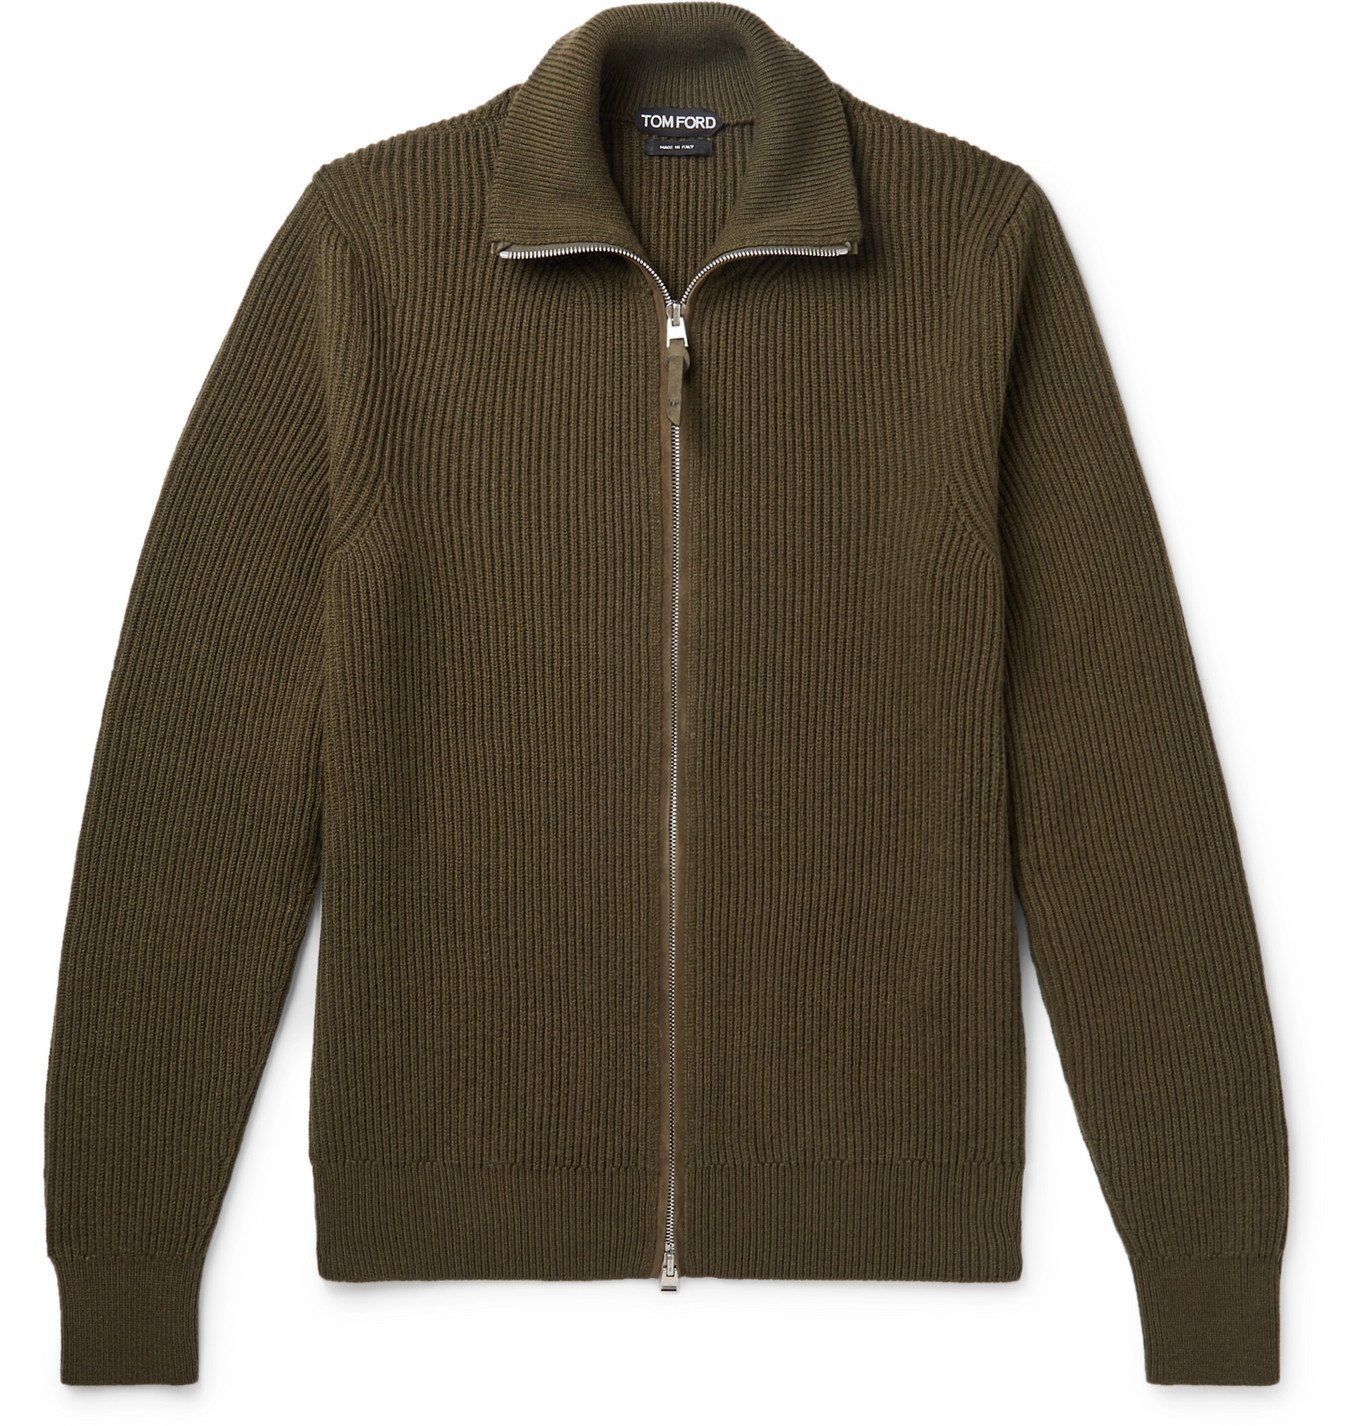 TOM FORD - Suede-Trimmed Ribbed Cashmere Cardigan - Green TOM FORD